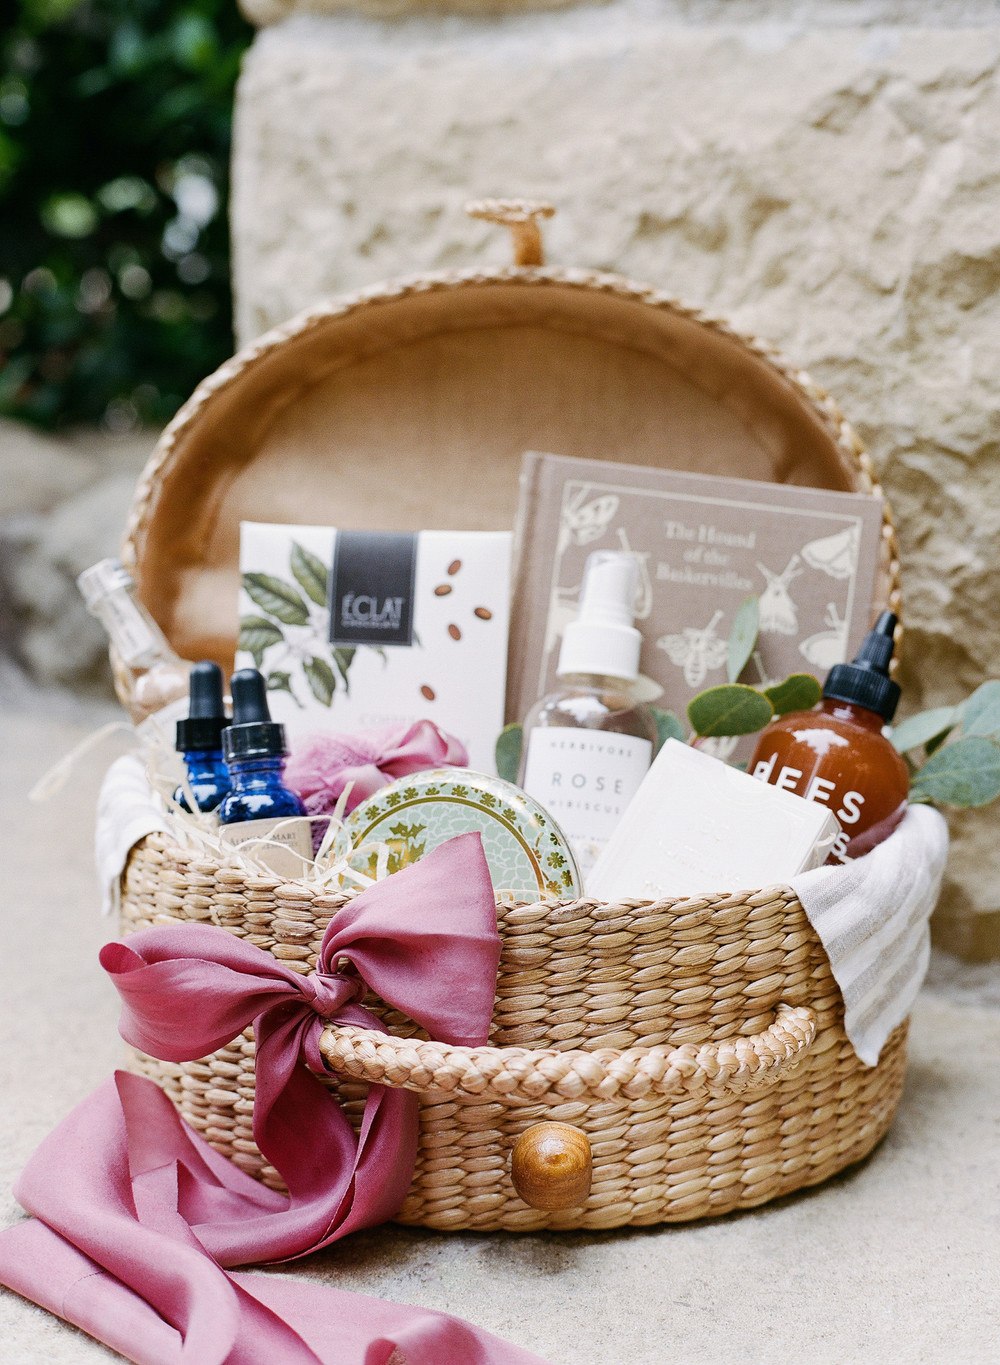 9 Welcome Bag Ideas for Your Wedding Guests - Wedding Sparrow